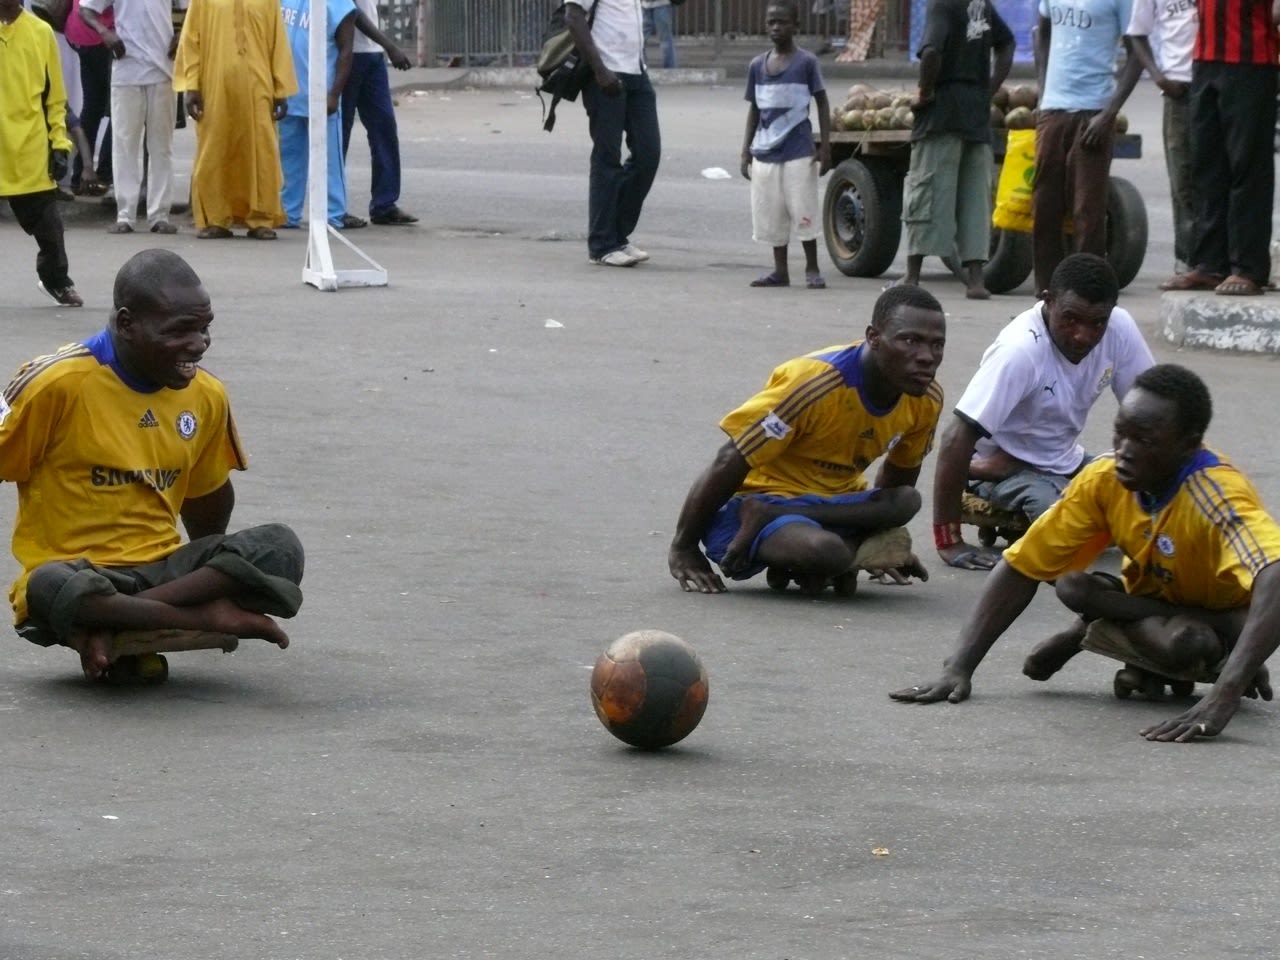 During the week, many of the players beg in the streets for money. 